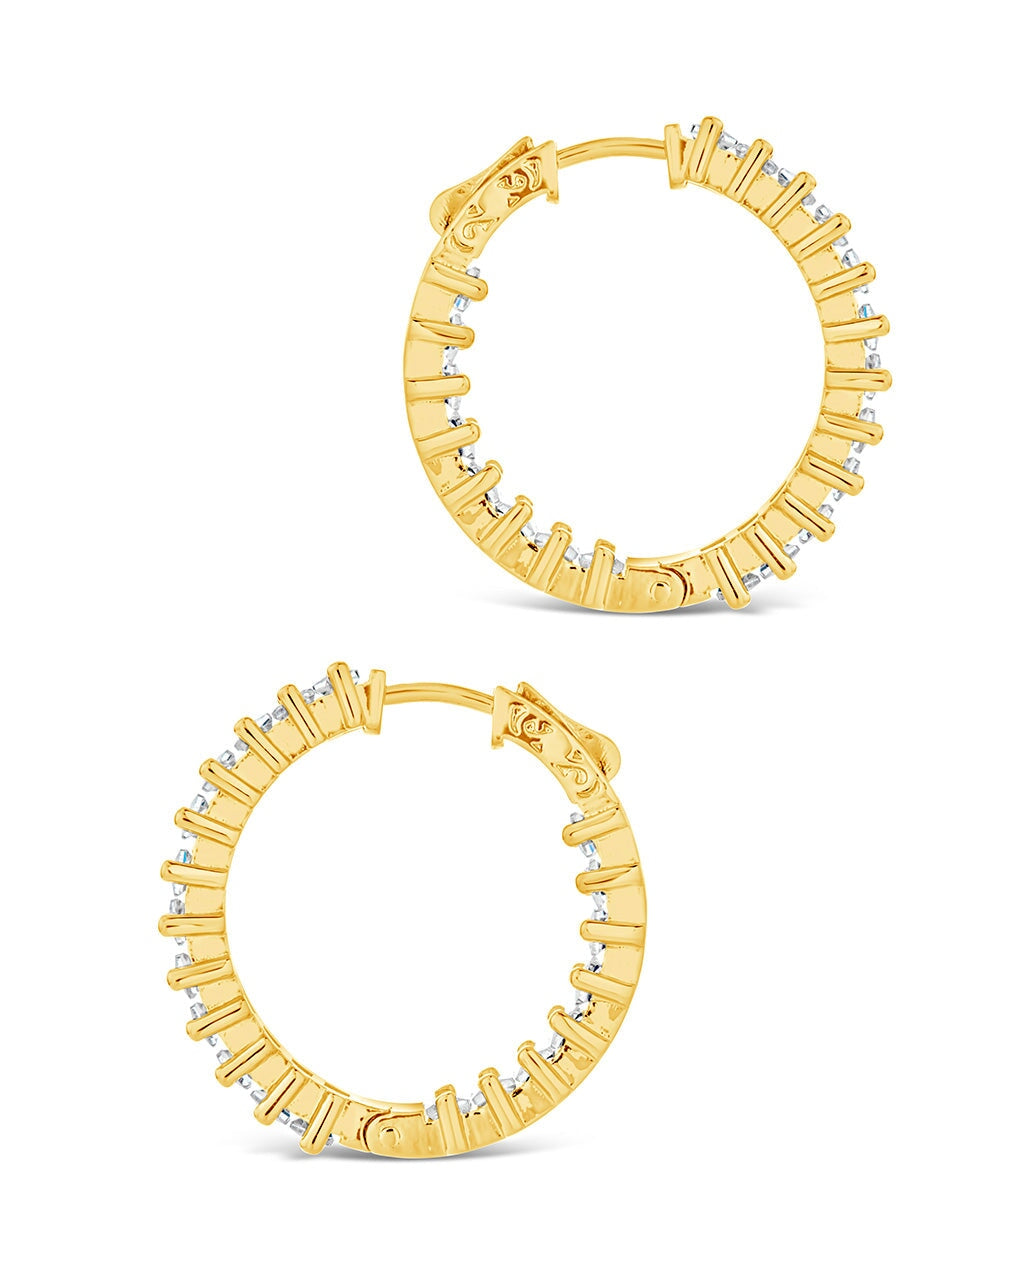 Paige CZ Hoops Earring Sterling Forever 